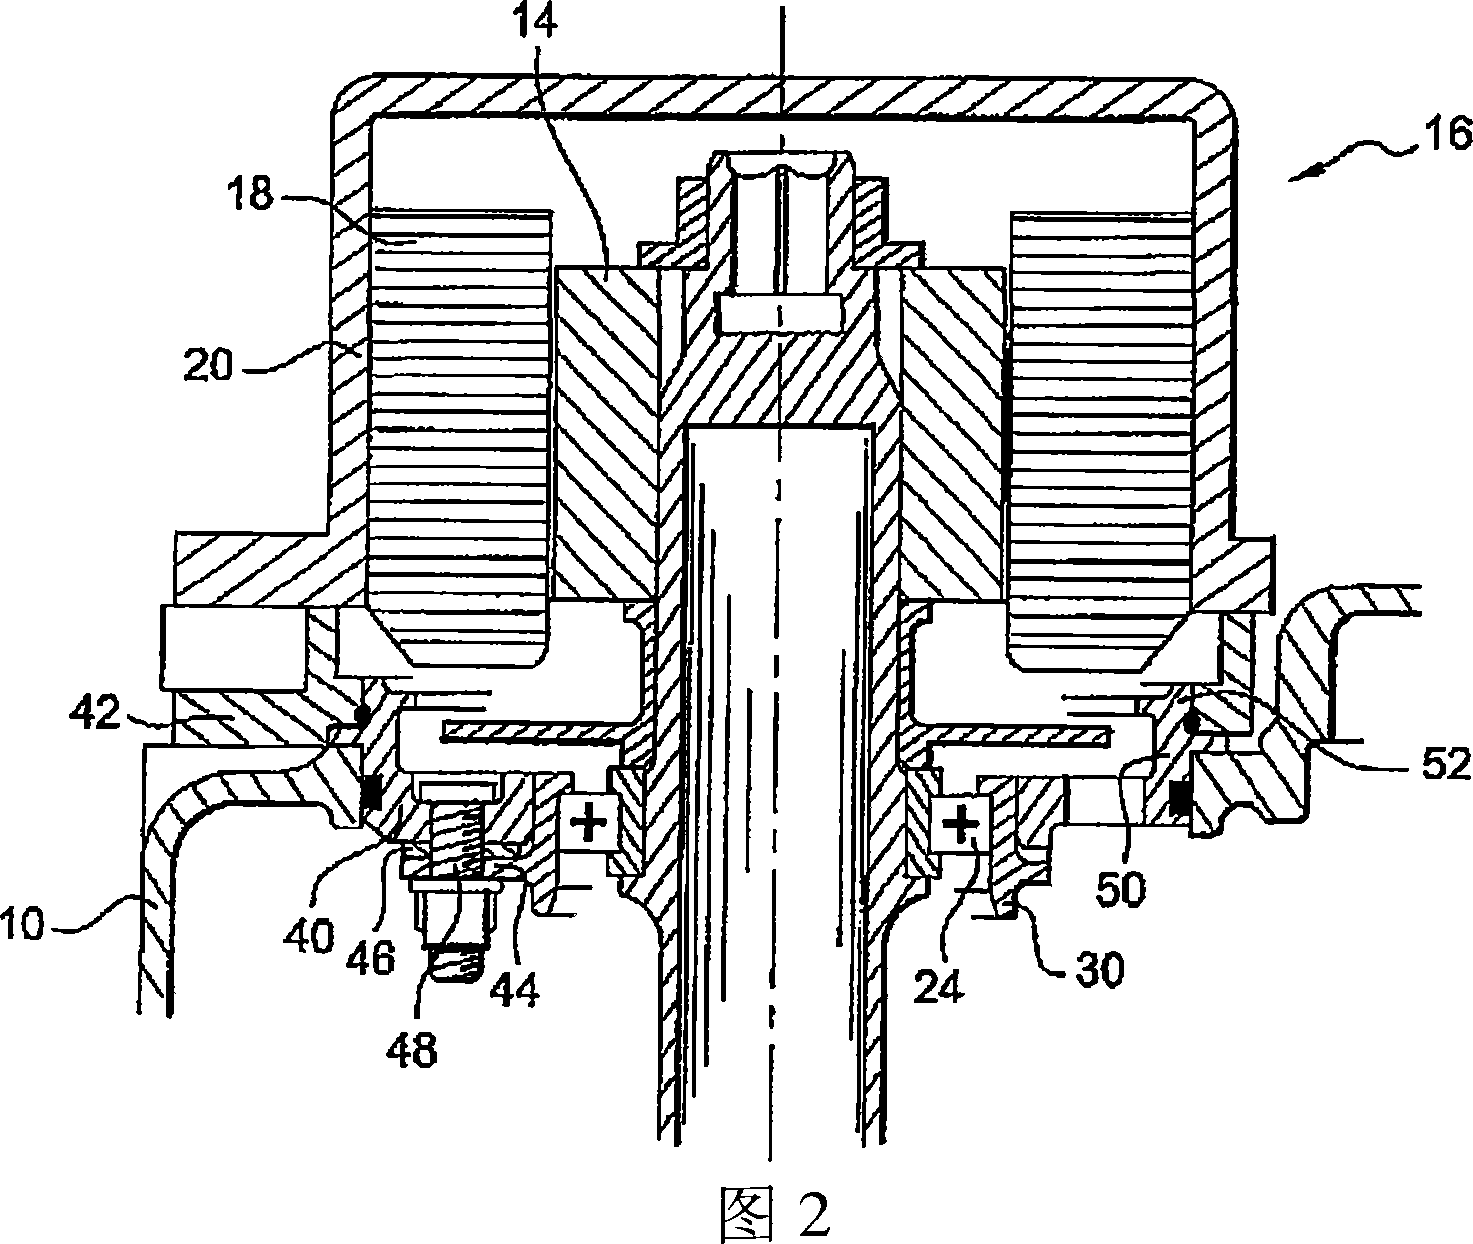 Box accessory in an airplane engine